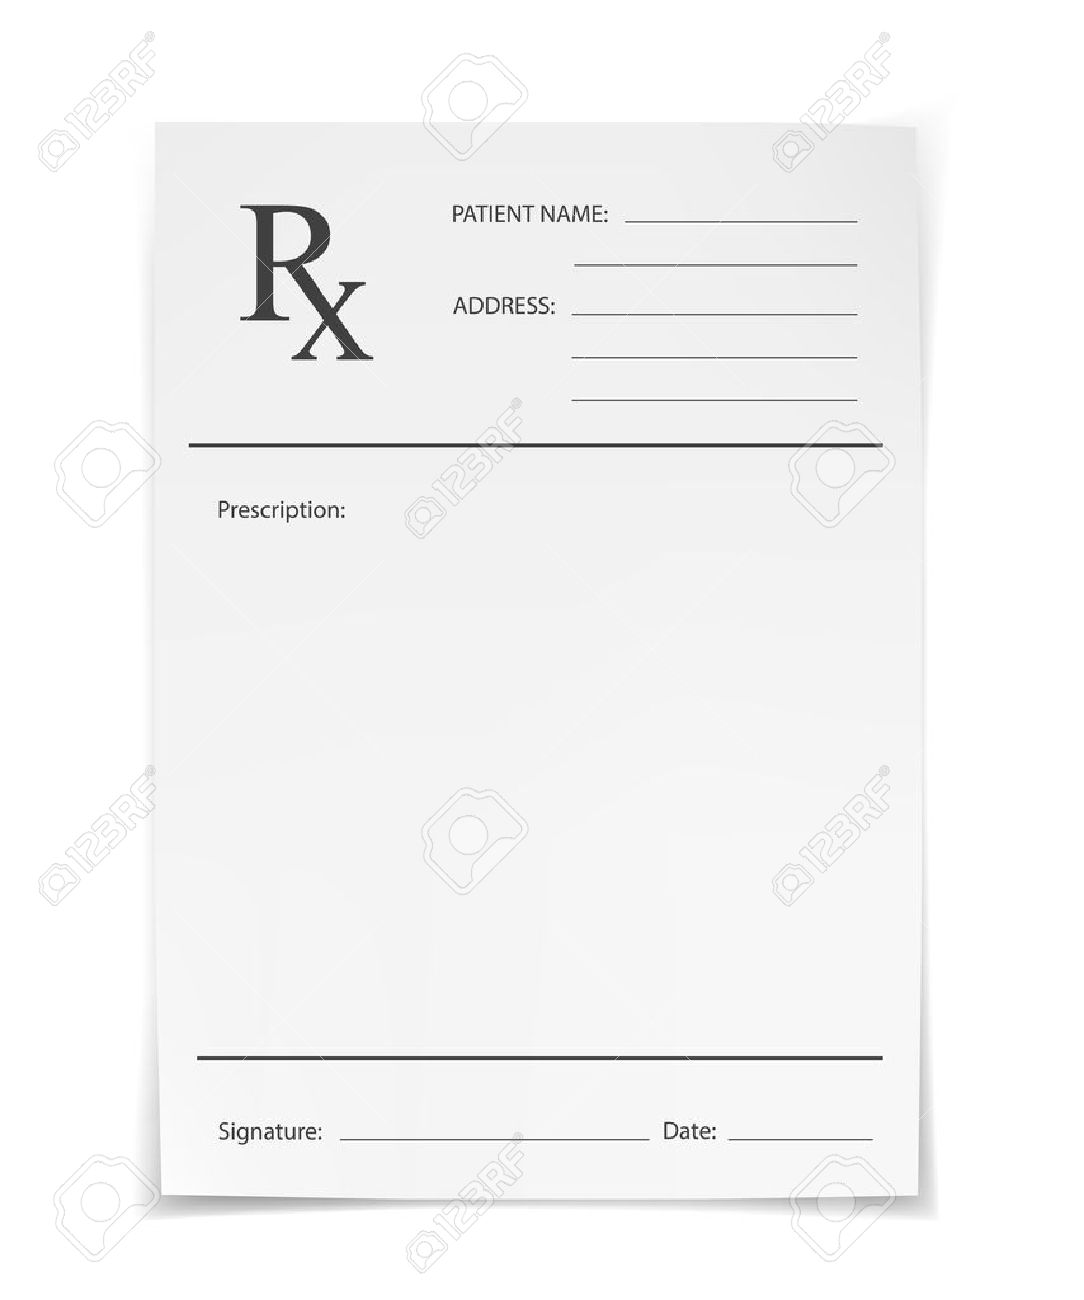 Blank Rx Prescription Form Isolated On White Background Royalty